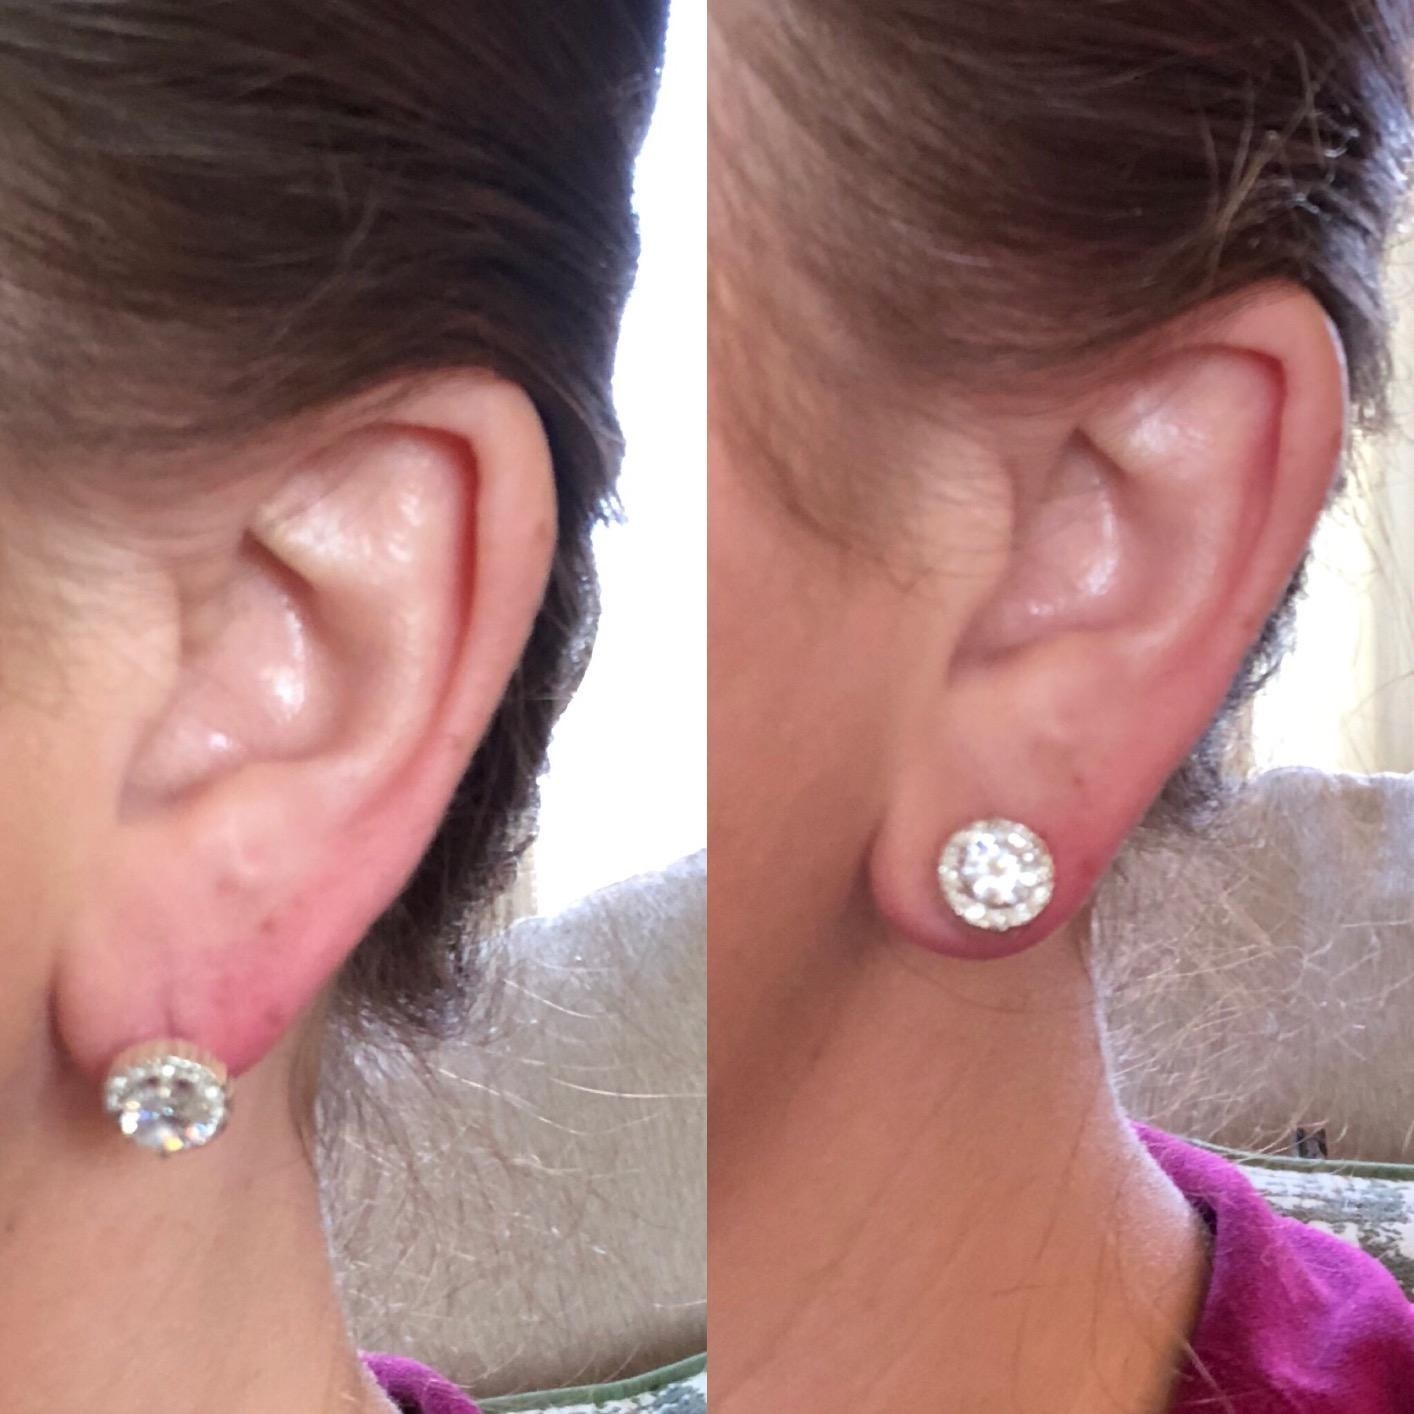 before and after reviewer images: the before shows an earlobe drooping with the weight of a stud earring and the after shows the same earlobe lifted using the magic bax earring lifters